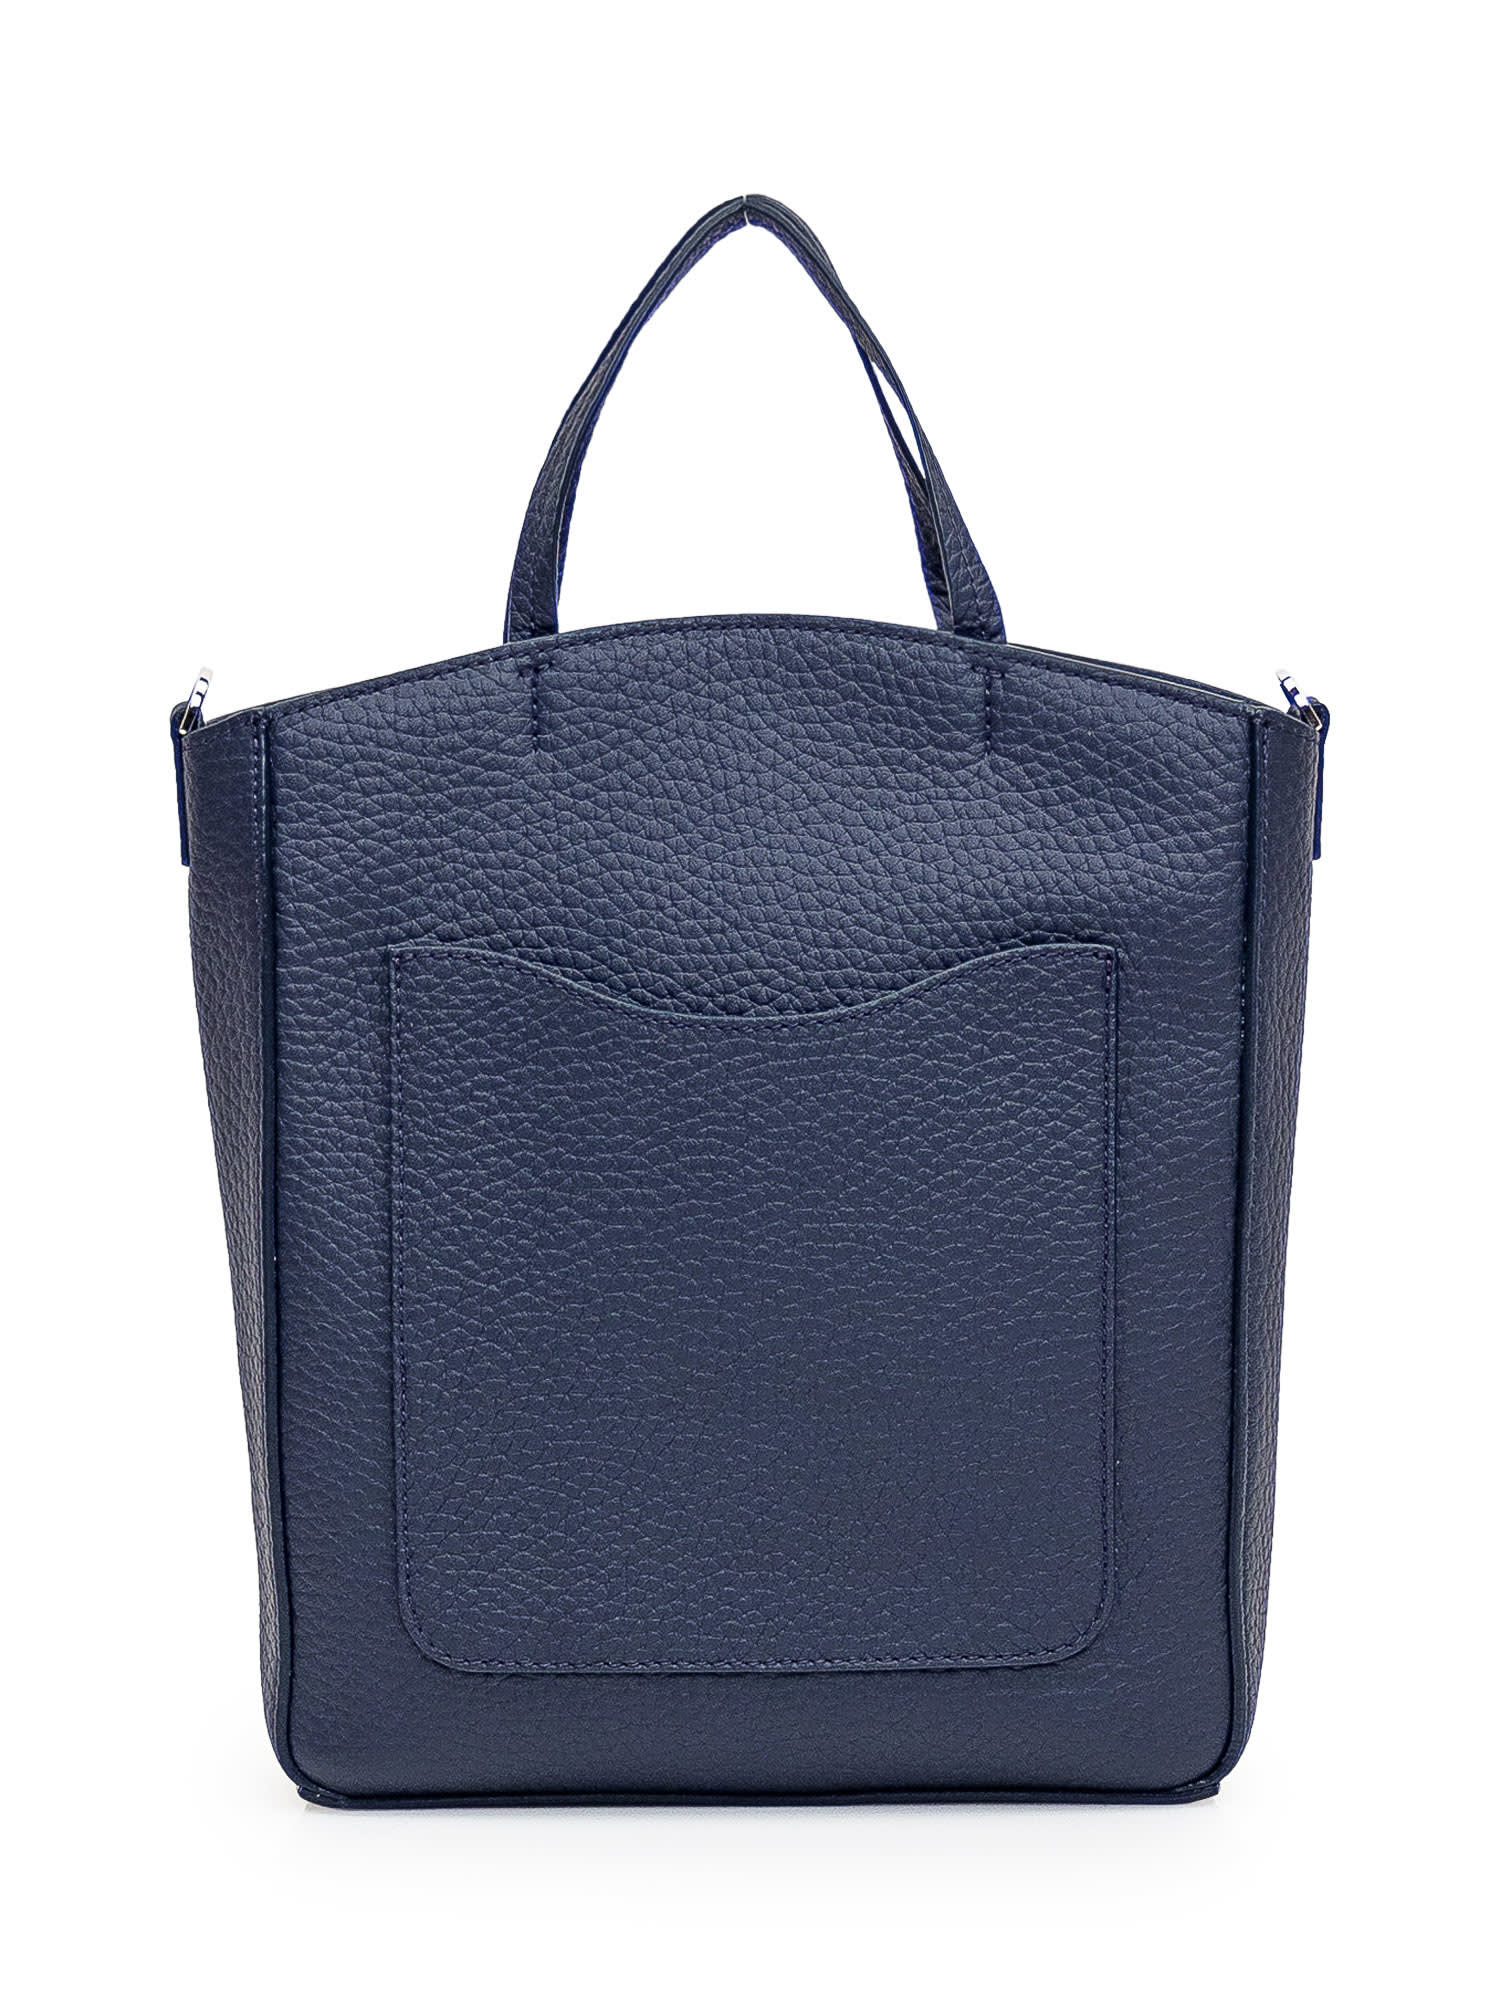 Shop Orciani Ladylike Small Shopper Bag In Navy